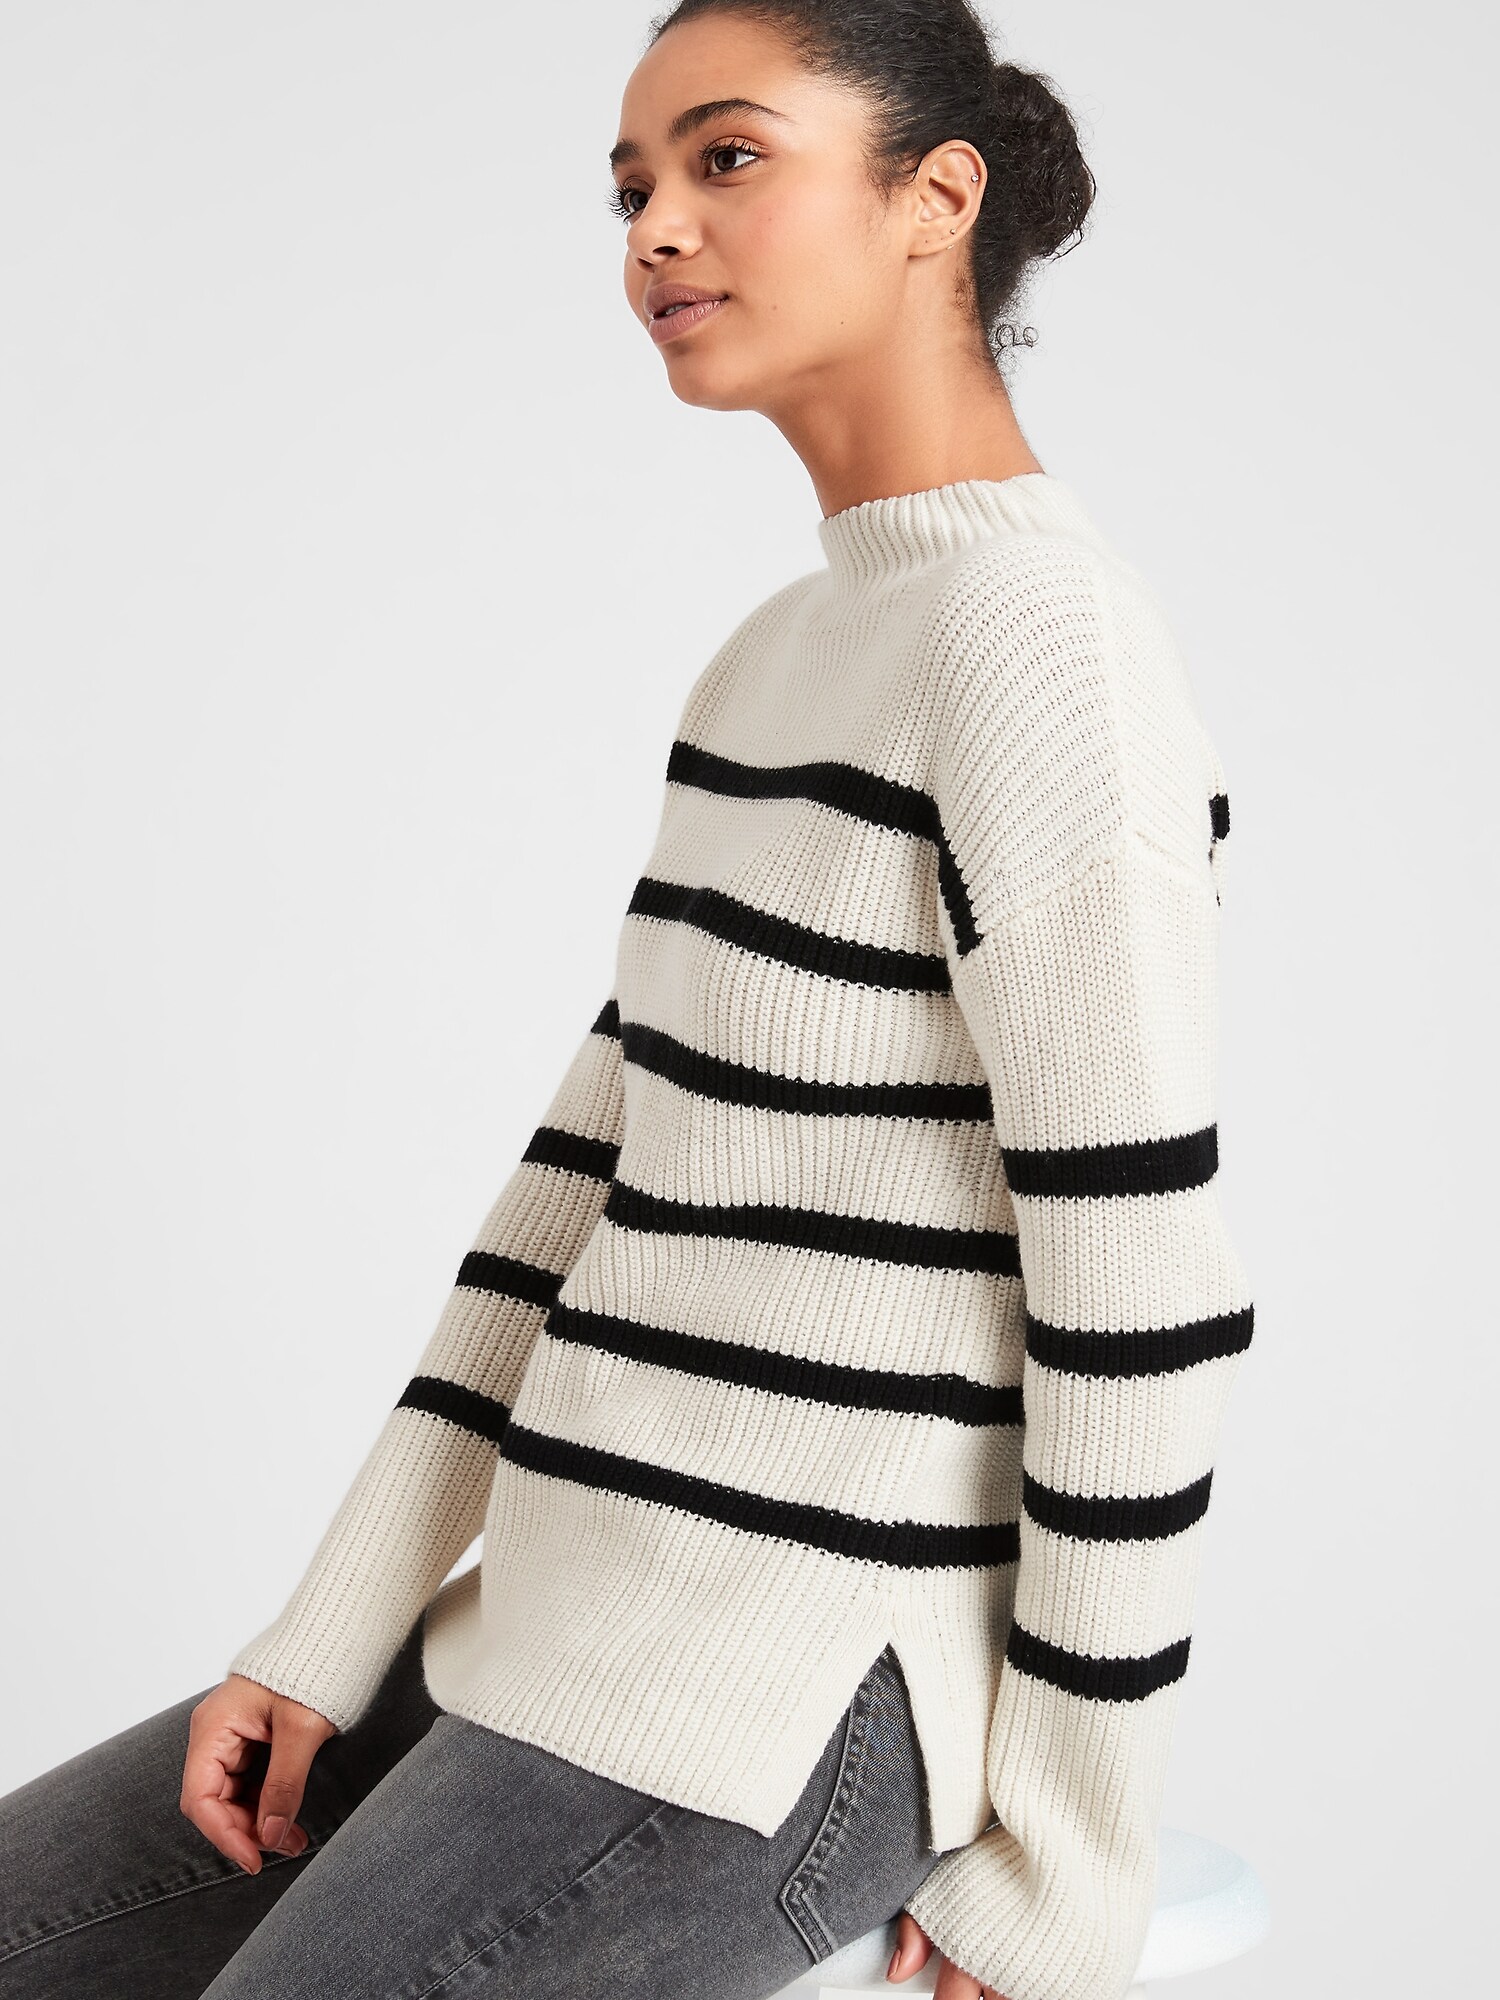 Textured Striped Mock-Neck Sweater